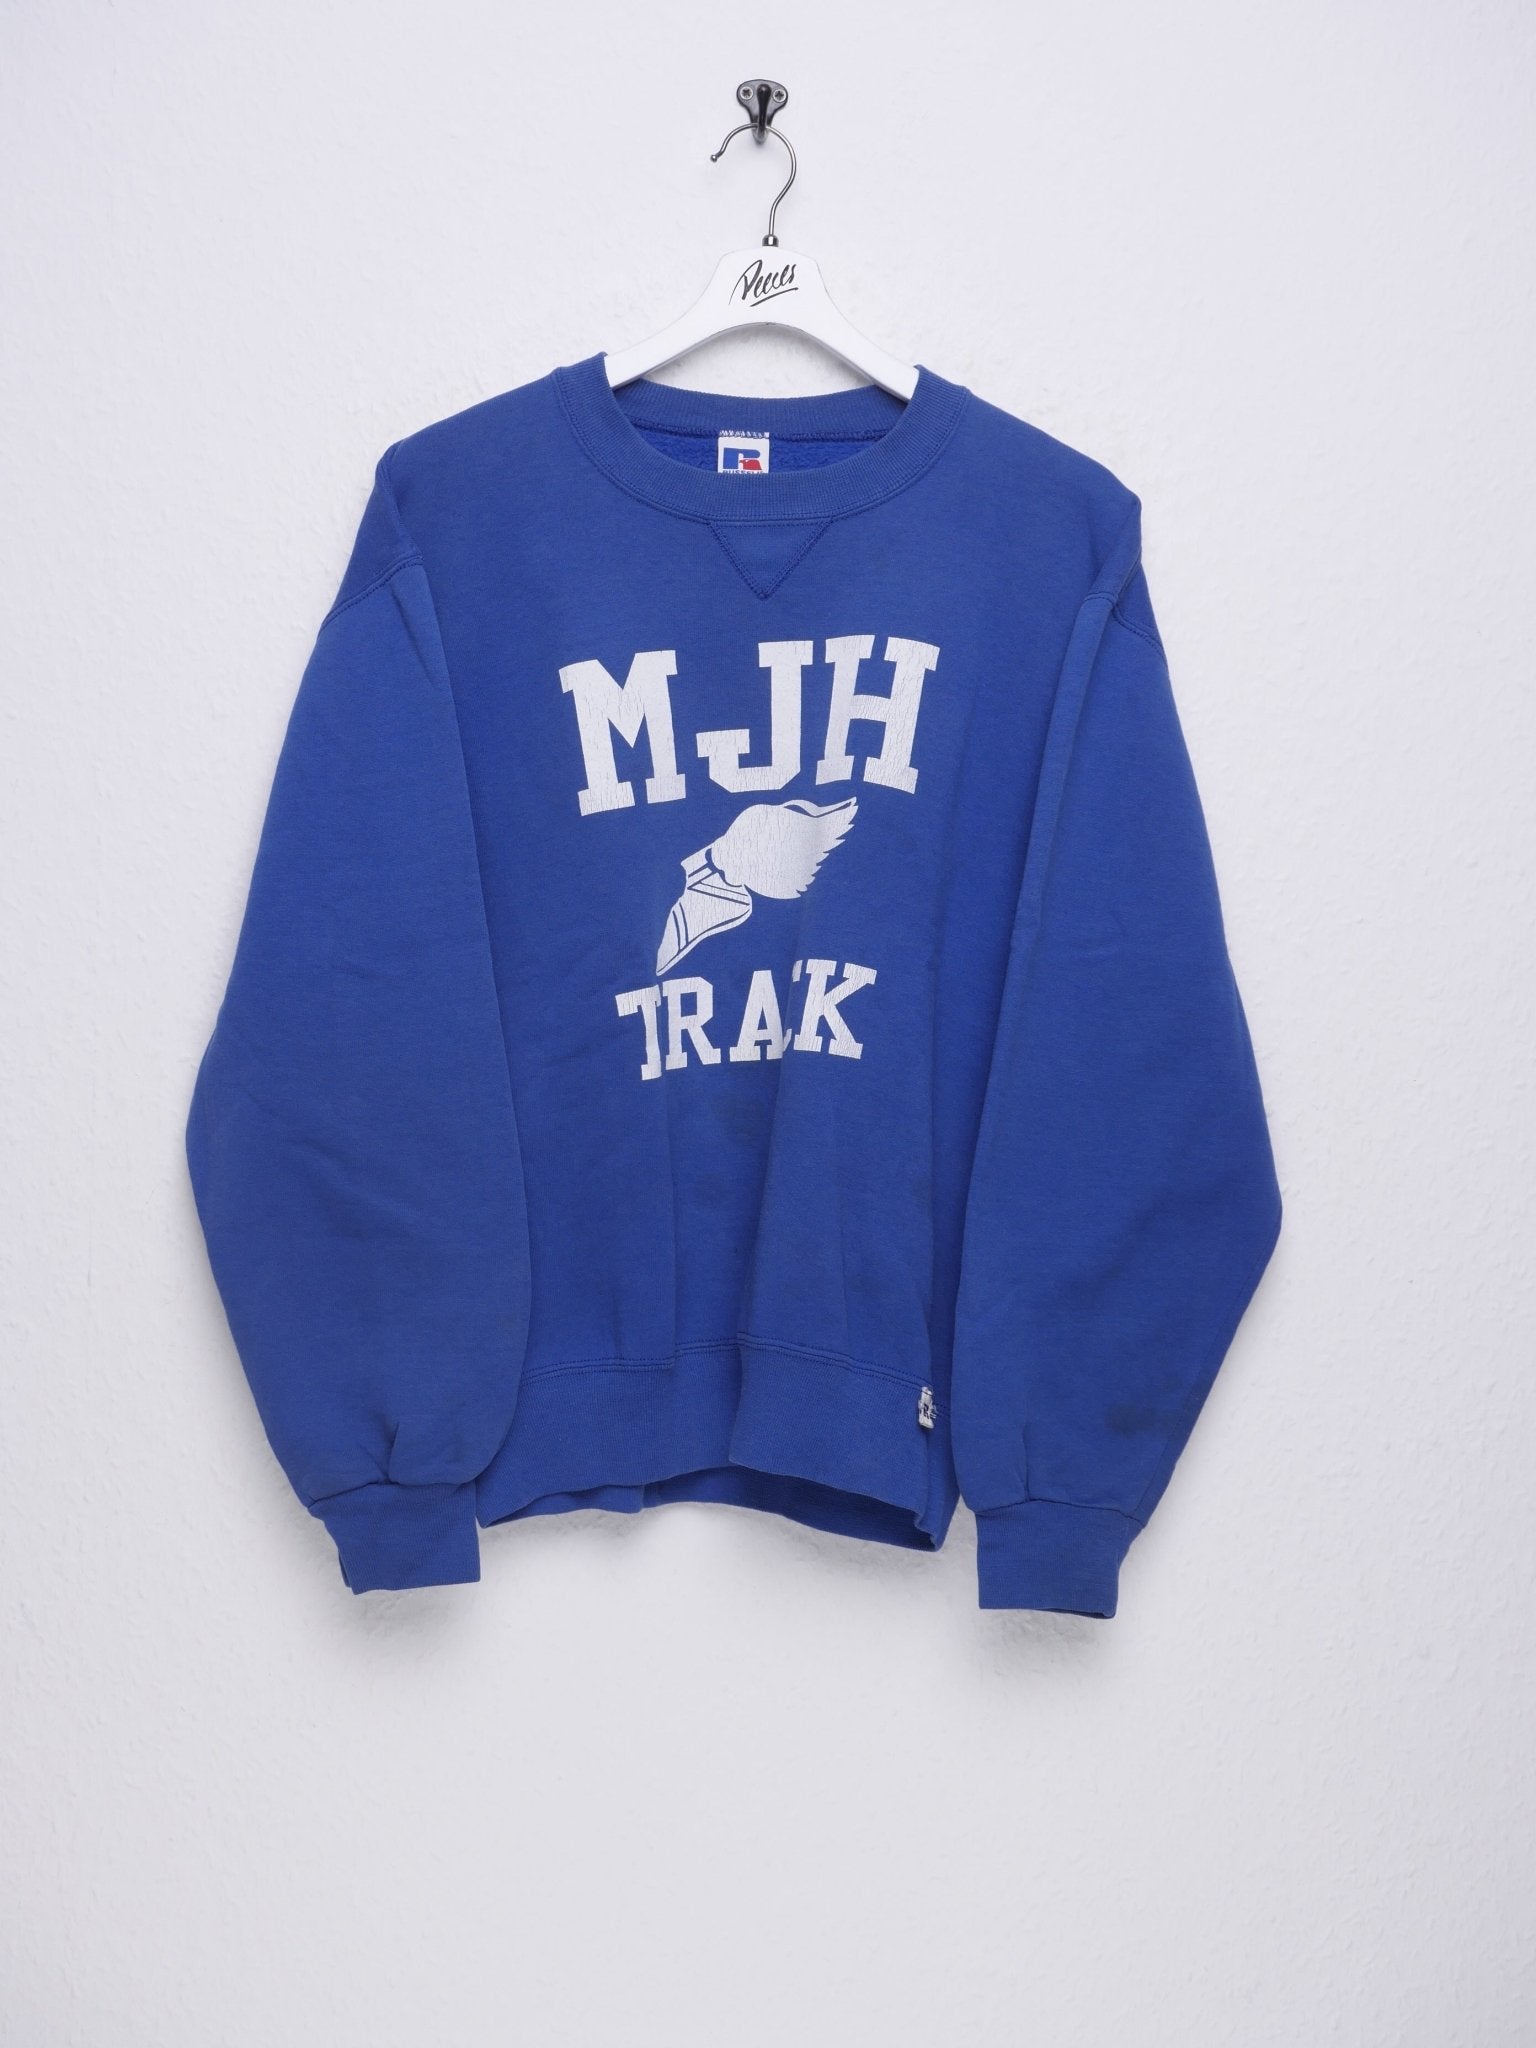 Russell Athletic printed MJH Track Graphic Vintage Sweater - Peeces